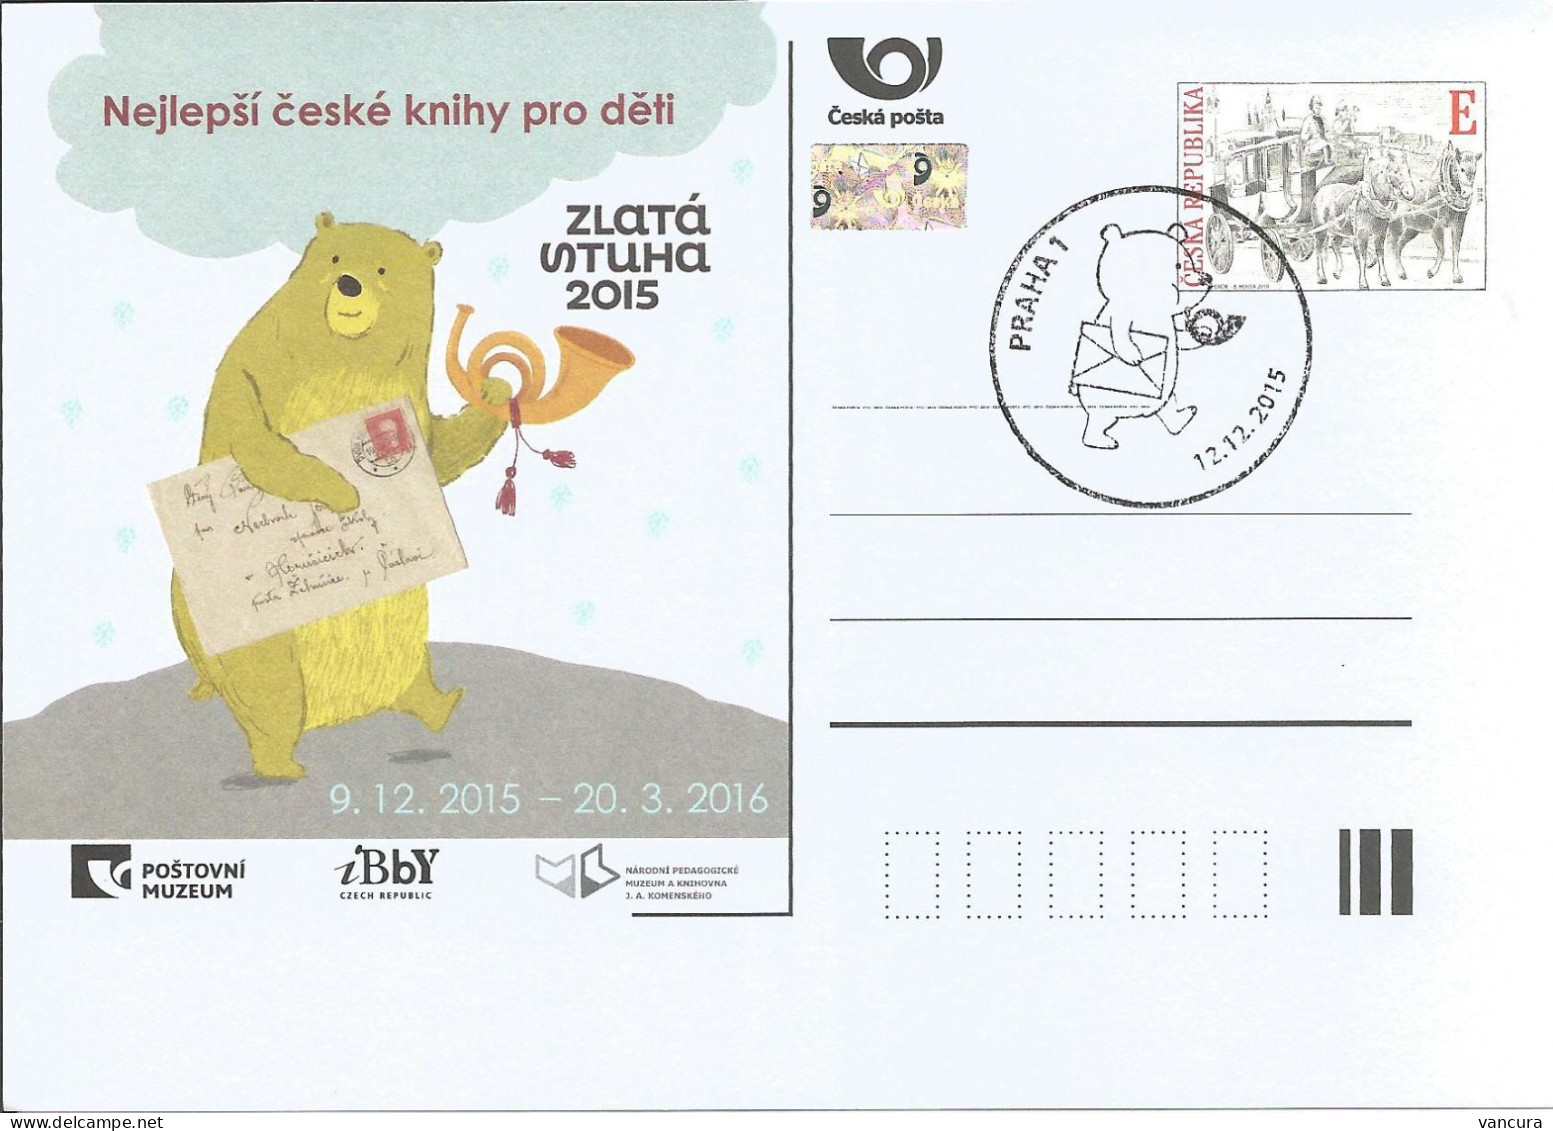 CDV PM 108 Czech Republic Exhibition In Post Museum - Illustrations For Children's Books 2015 Bear As A Postman - Bears